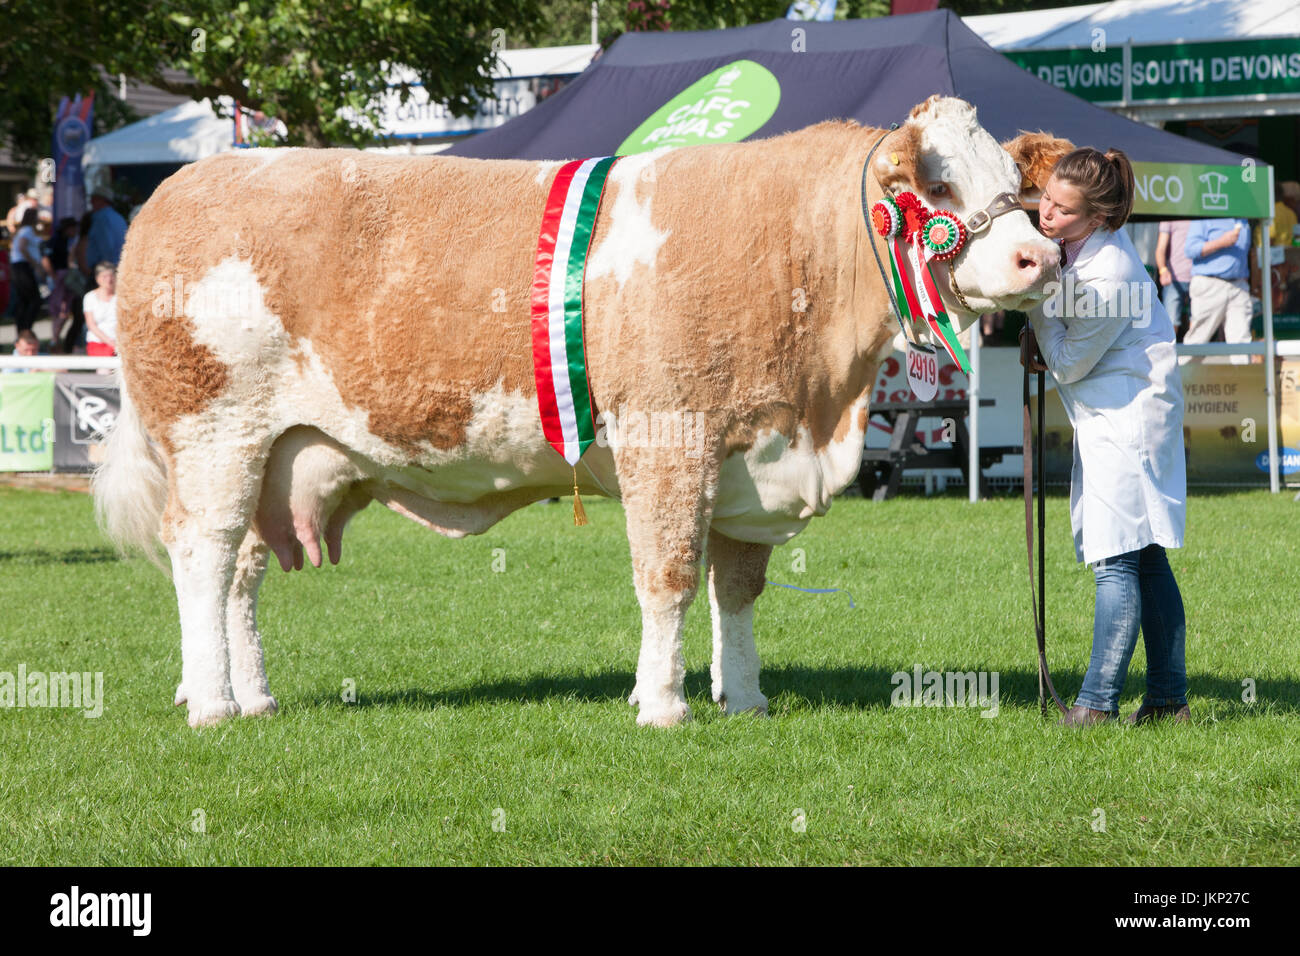 Builth Wells, Wales, UK. 24th July, 2017. Judged to be the best animal of all the cattle breeds judged,this Simmental took top prize.With handler at the cattle ring at The Royal Welsh Showground.Llanelwedd,Builth Wells,Powys,Wales,UK.Sunny opening day of the 4 day event,which is the largest of its kind in Europe. Credit: Paul Quayle/Alamy Live News Stock Photo